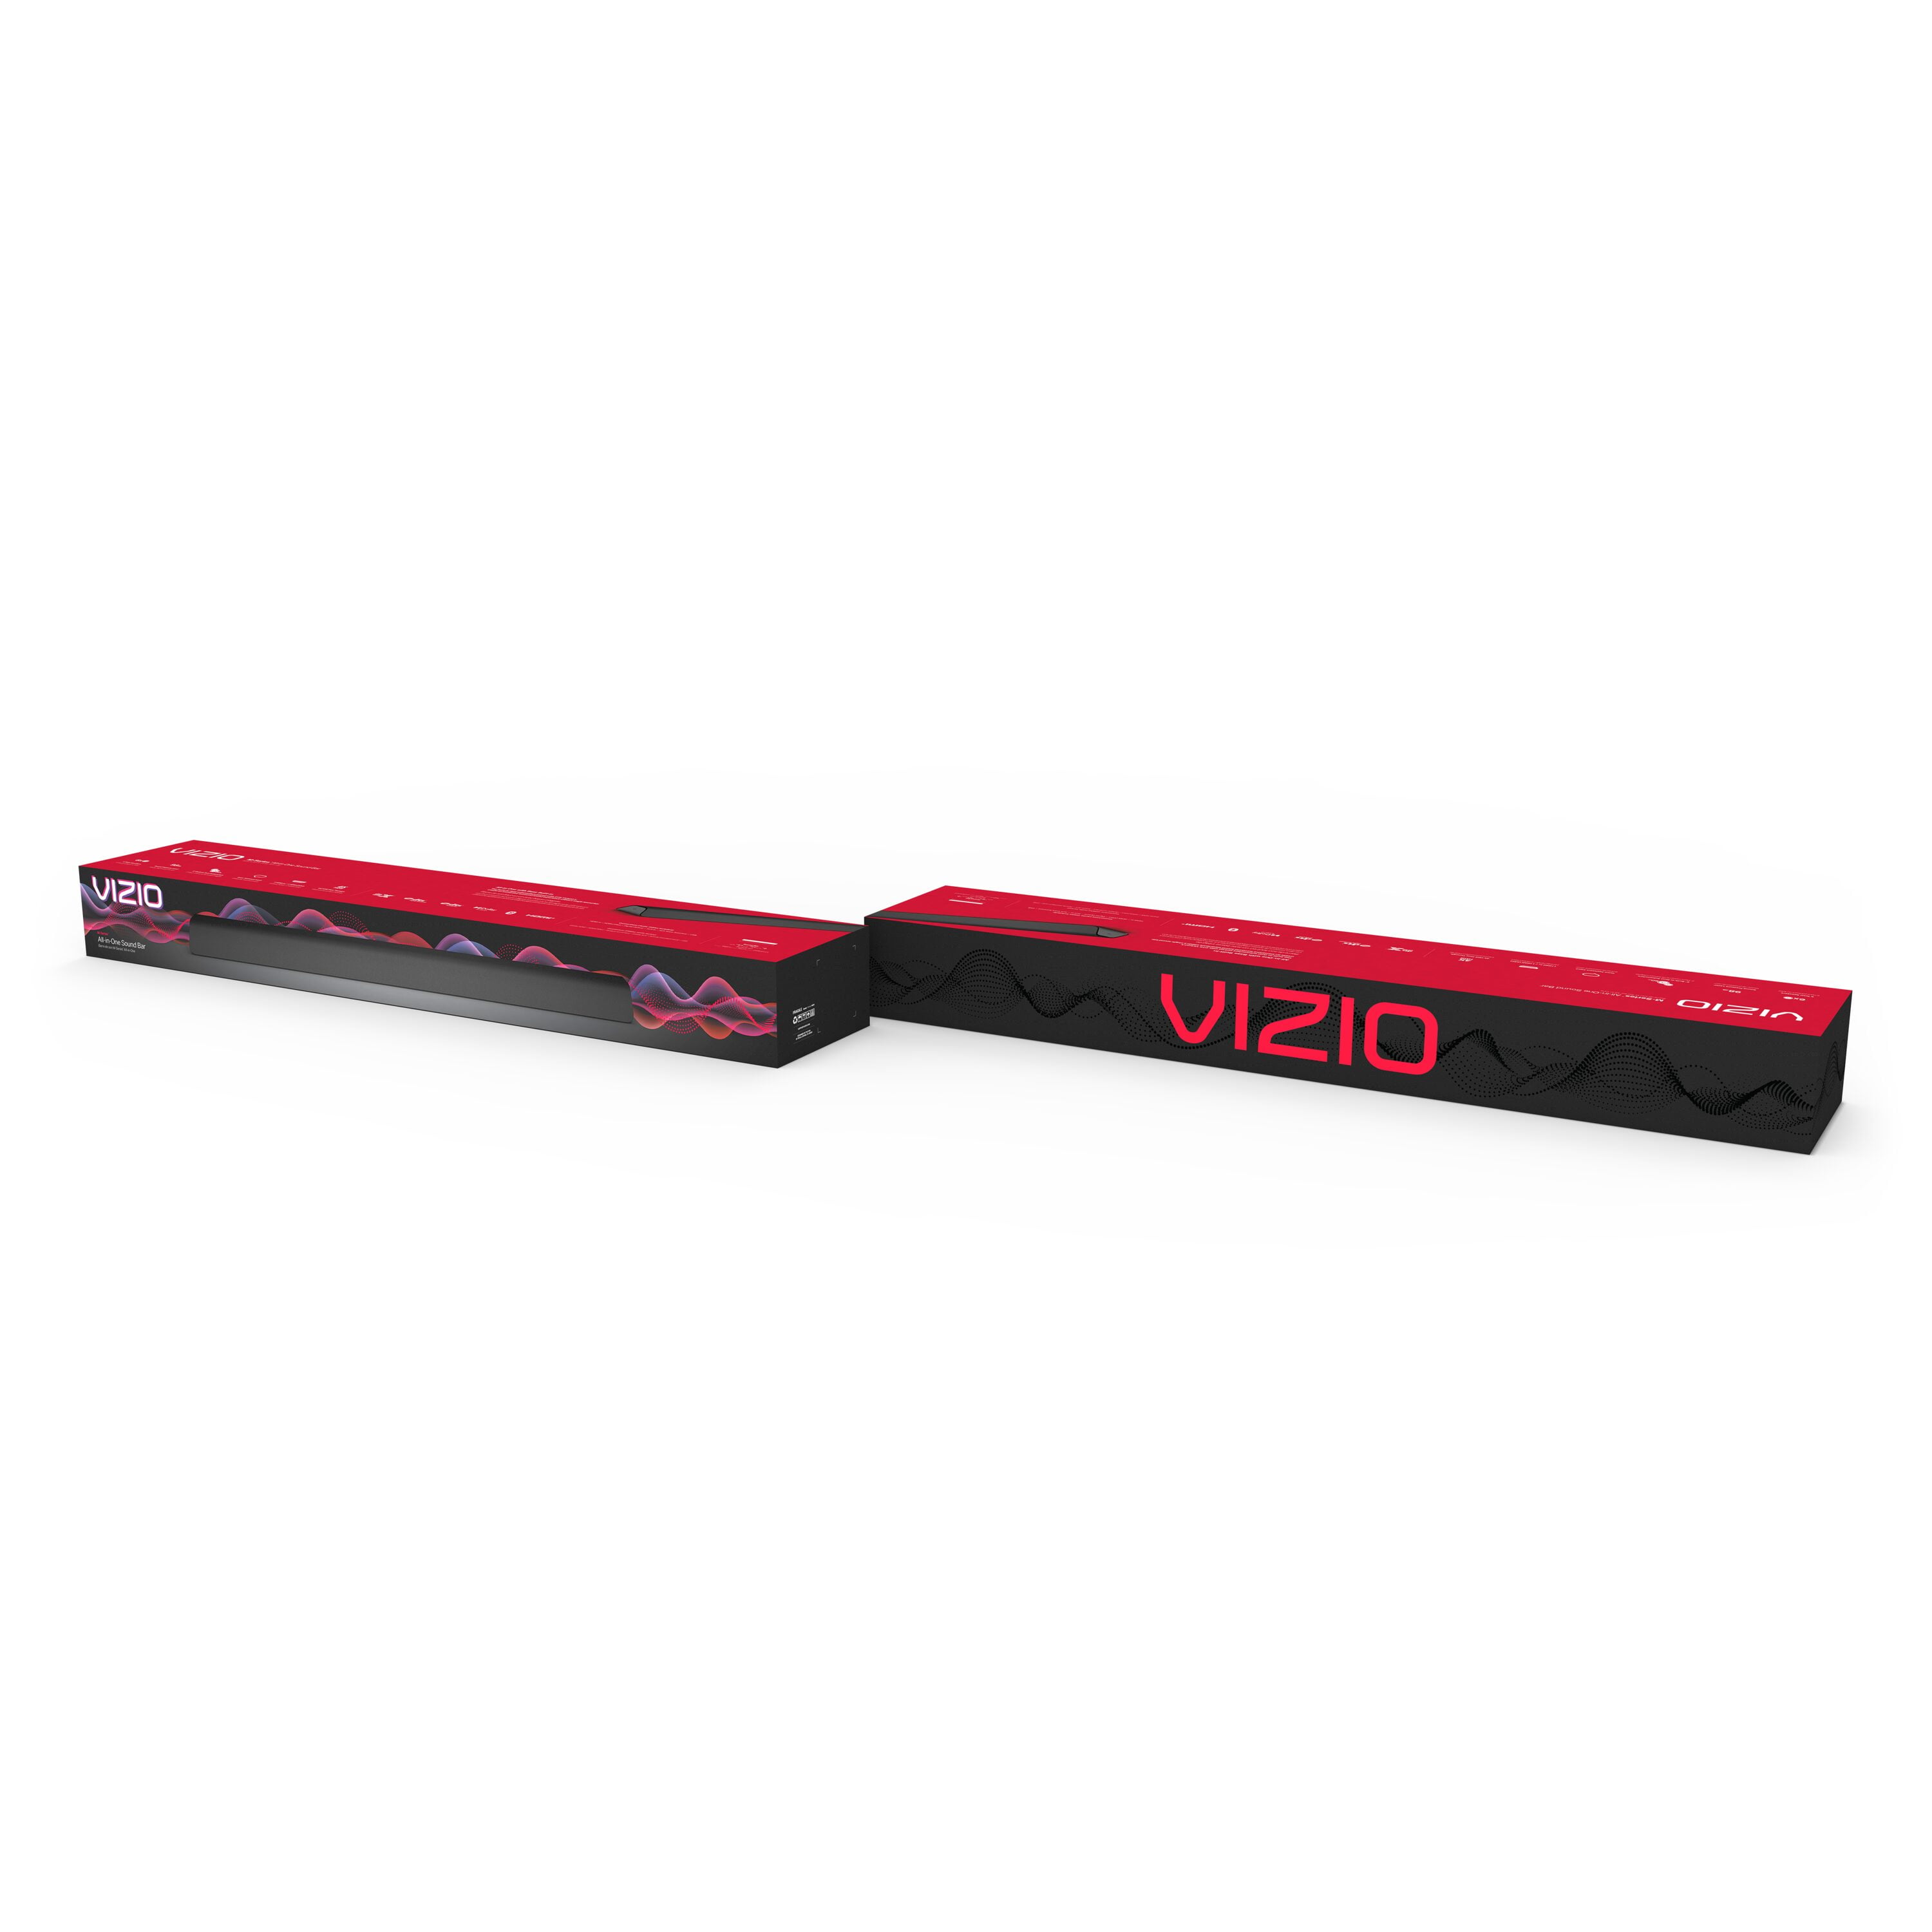 Renewed M21d-H8R VIZIO M-Series All-in-One 2.1 Home Theater Sound Bar 